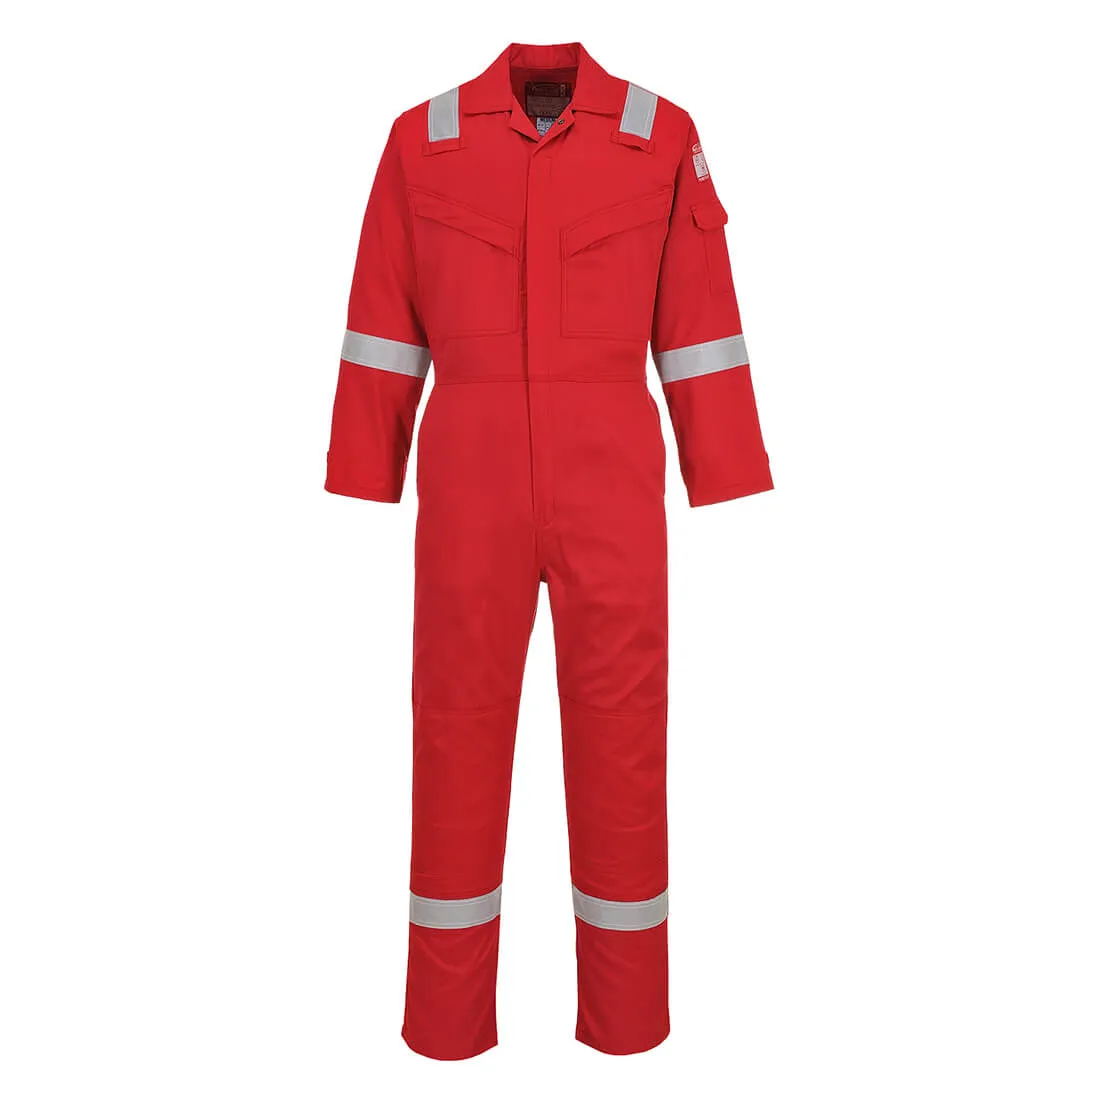 Biz Flame Mens Flame Resistant Super Lightweight Antistatic Coverall - Red, 2XL, 32"